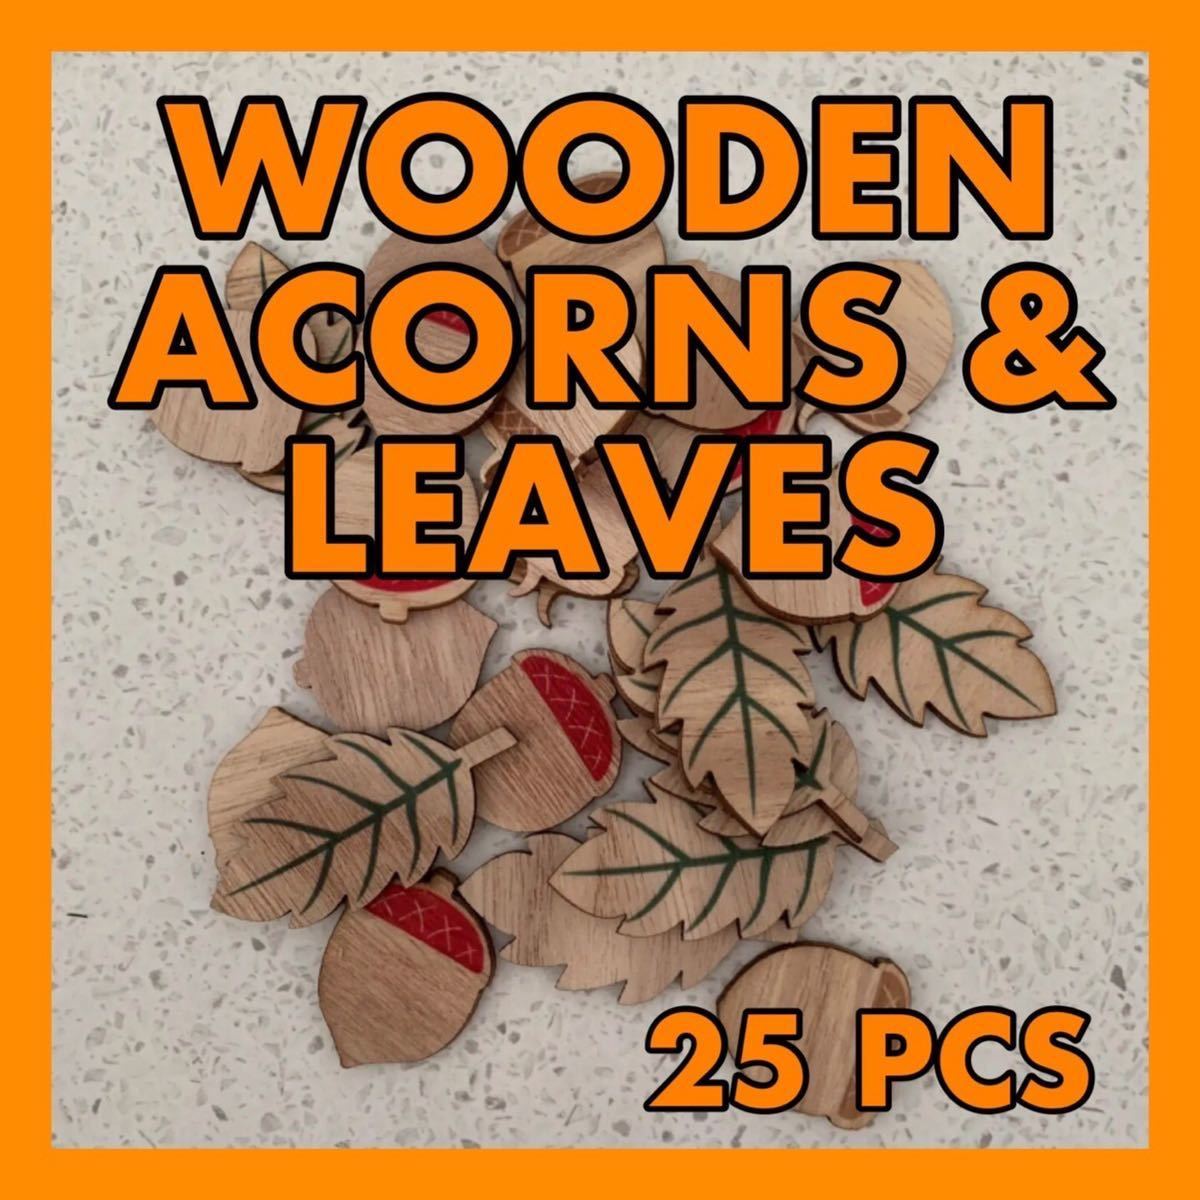 Acorns, acorns, tole painting, wooden, interior, ornament, object, ornament, handmade, materials, new, handmade, plain wood, Handcraft, Handicrafts, Woodworking, paint, Tole painting